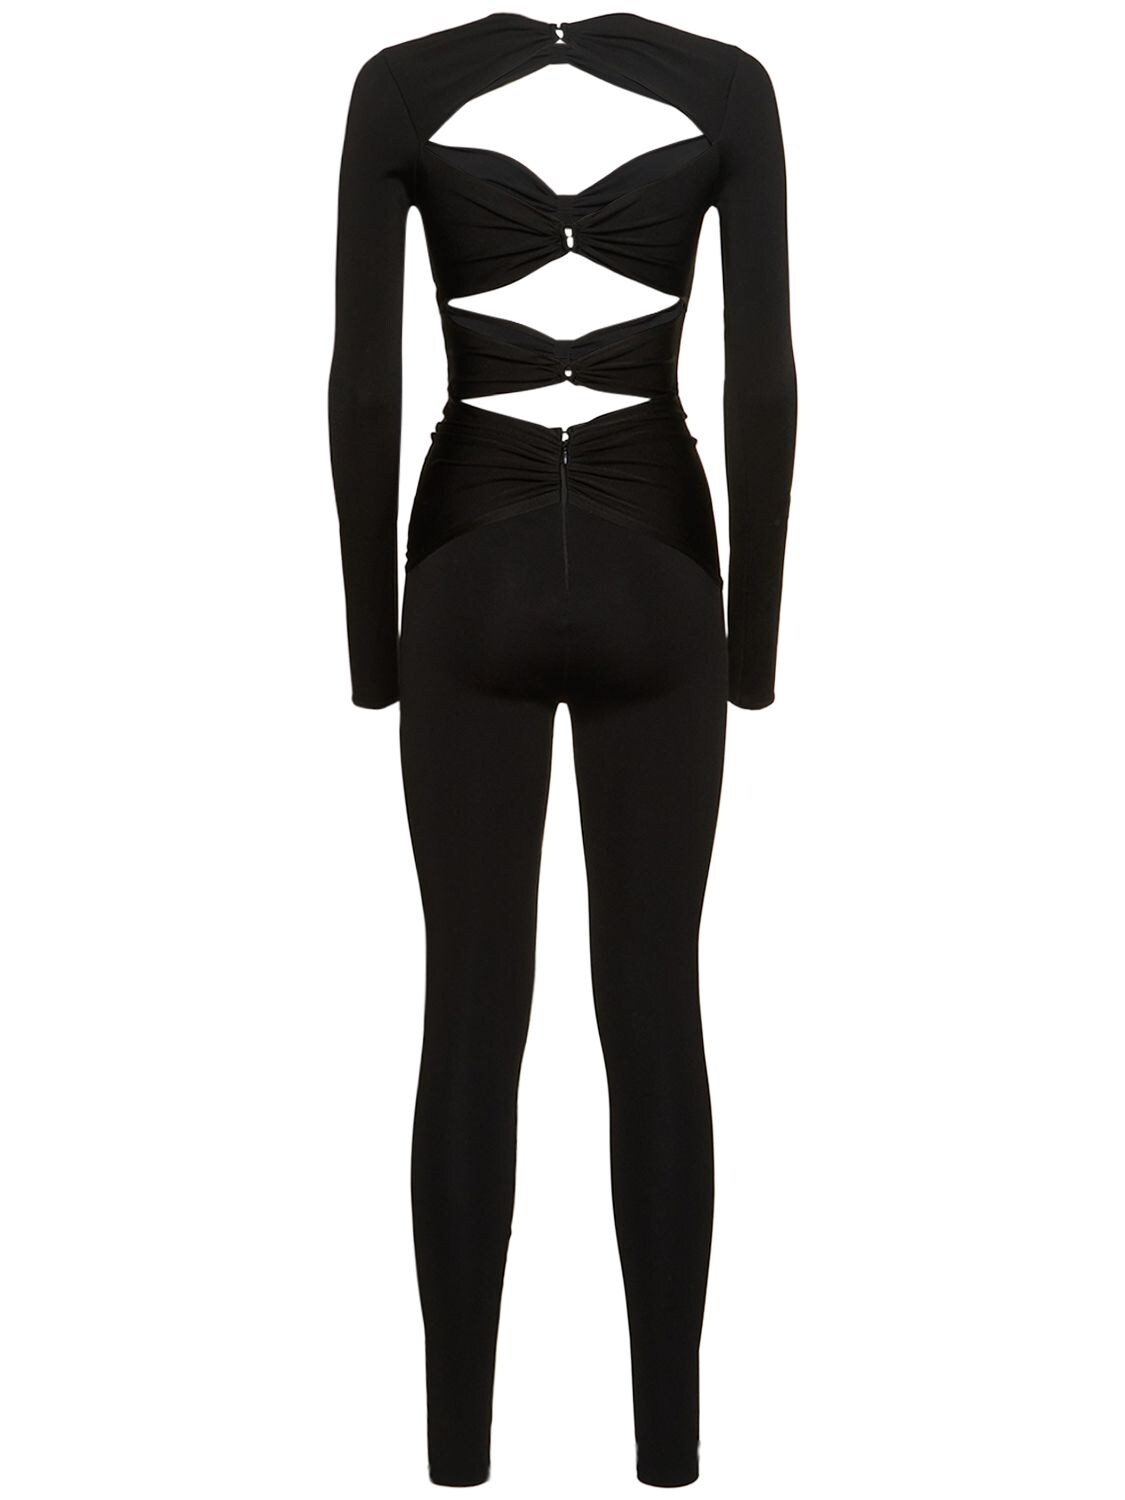 dressing gownRTO CAVALLI COMPACT KNIT CUTOUT CATSUIT